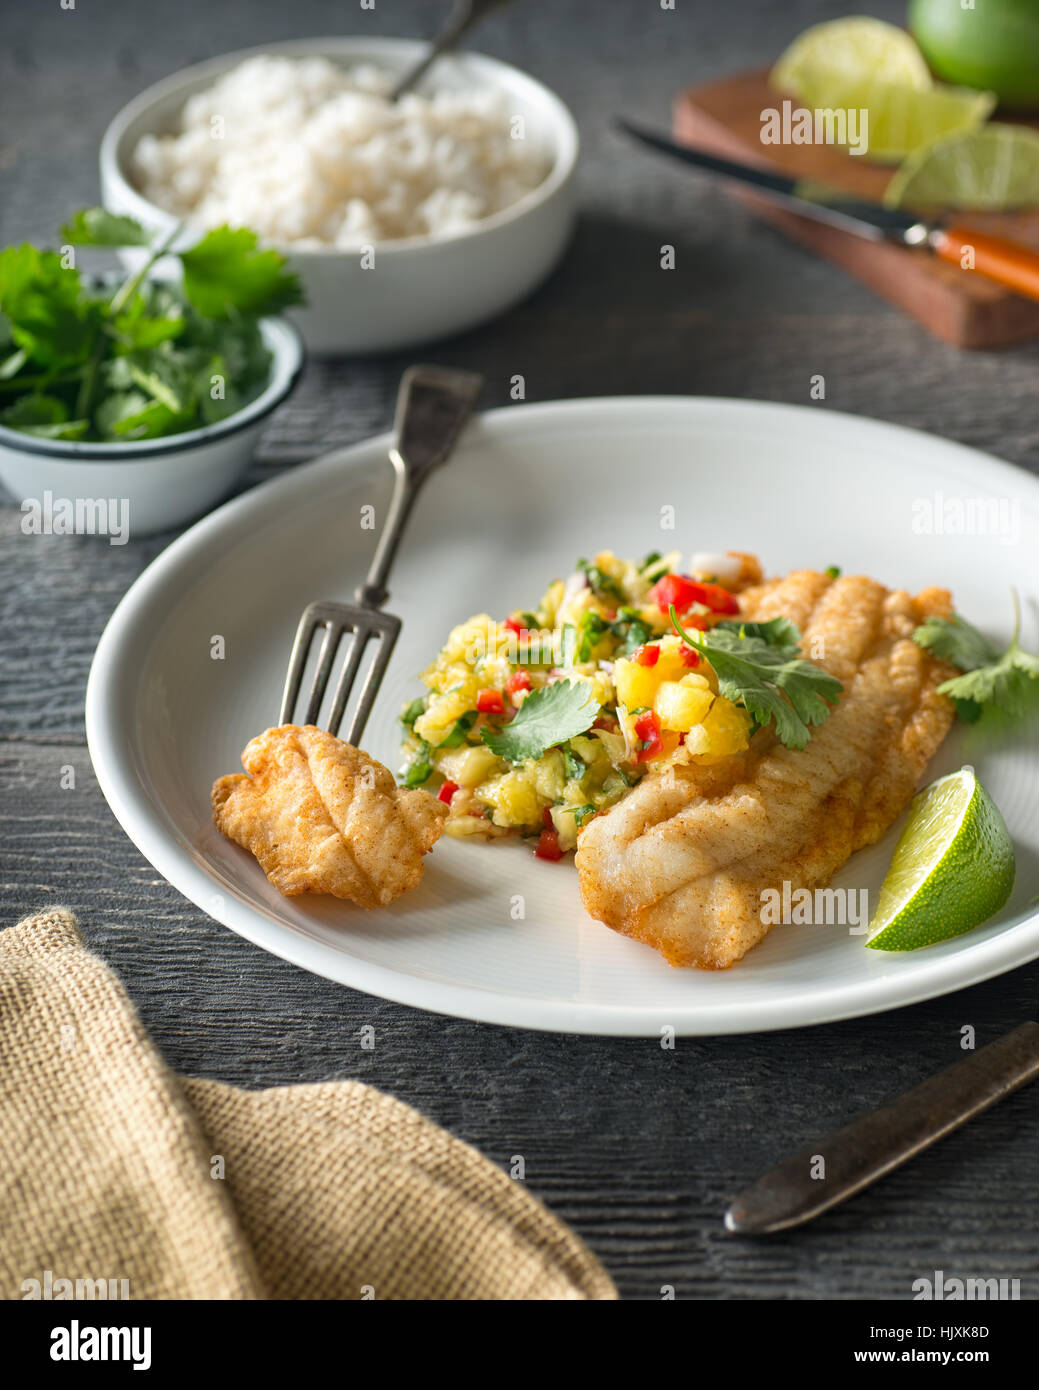 Delicious sauteed fish with pineapple jalapeno salsa and lime. Stock Photo